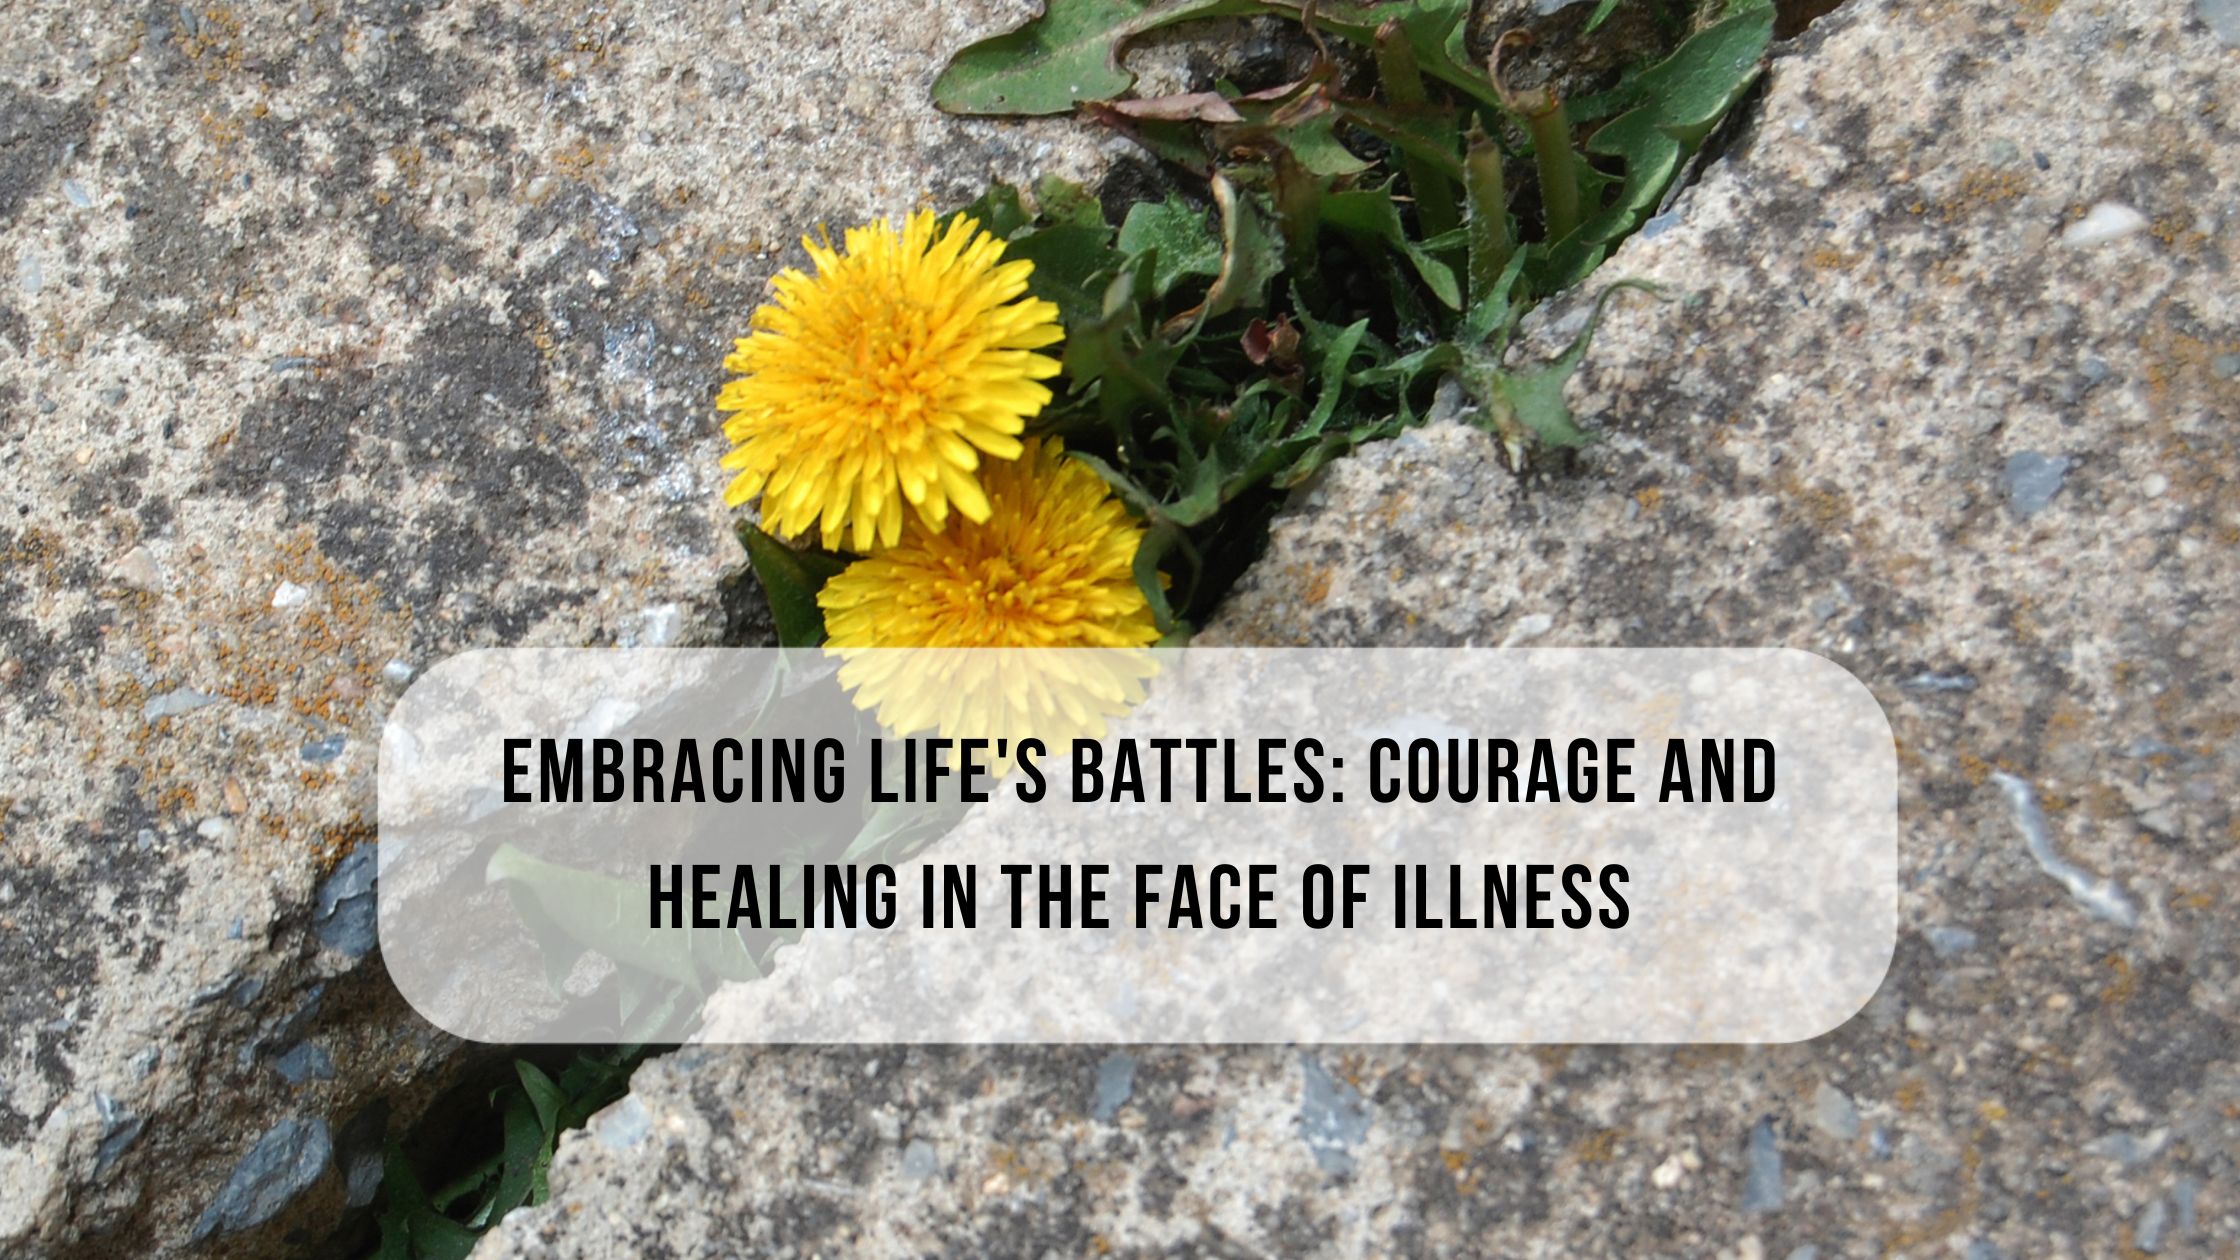 Embracing Life’s Battles: Courage and Healing in the Face of Illness